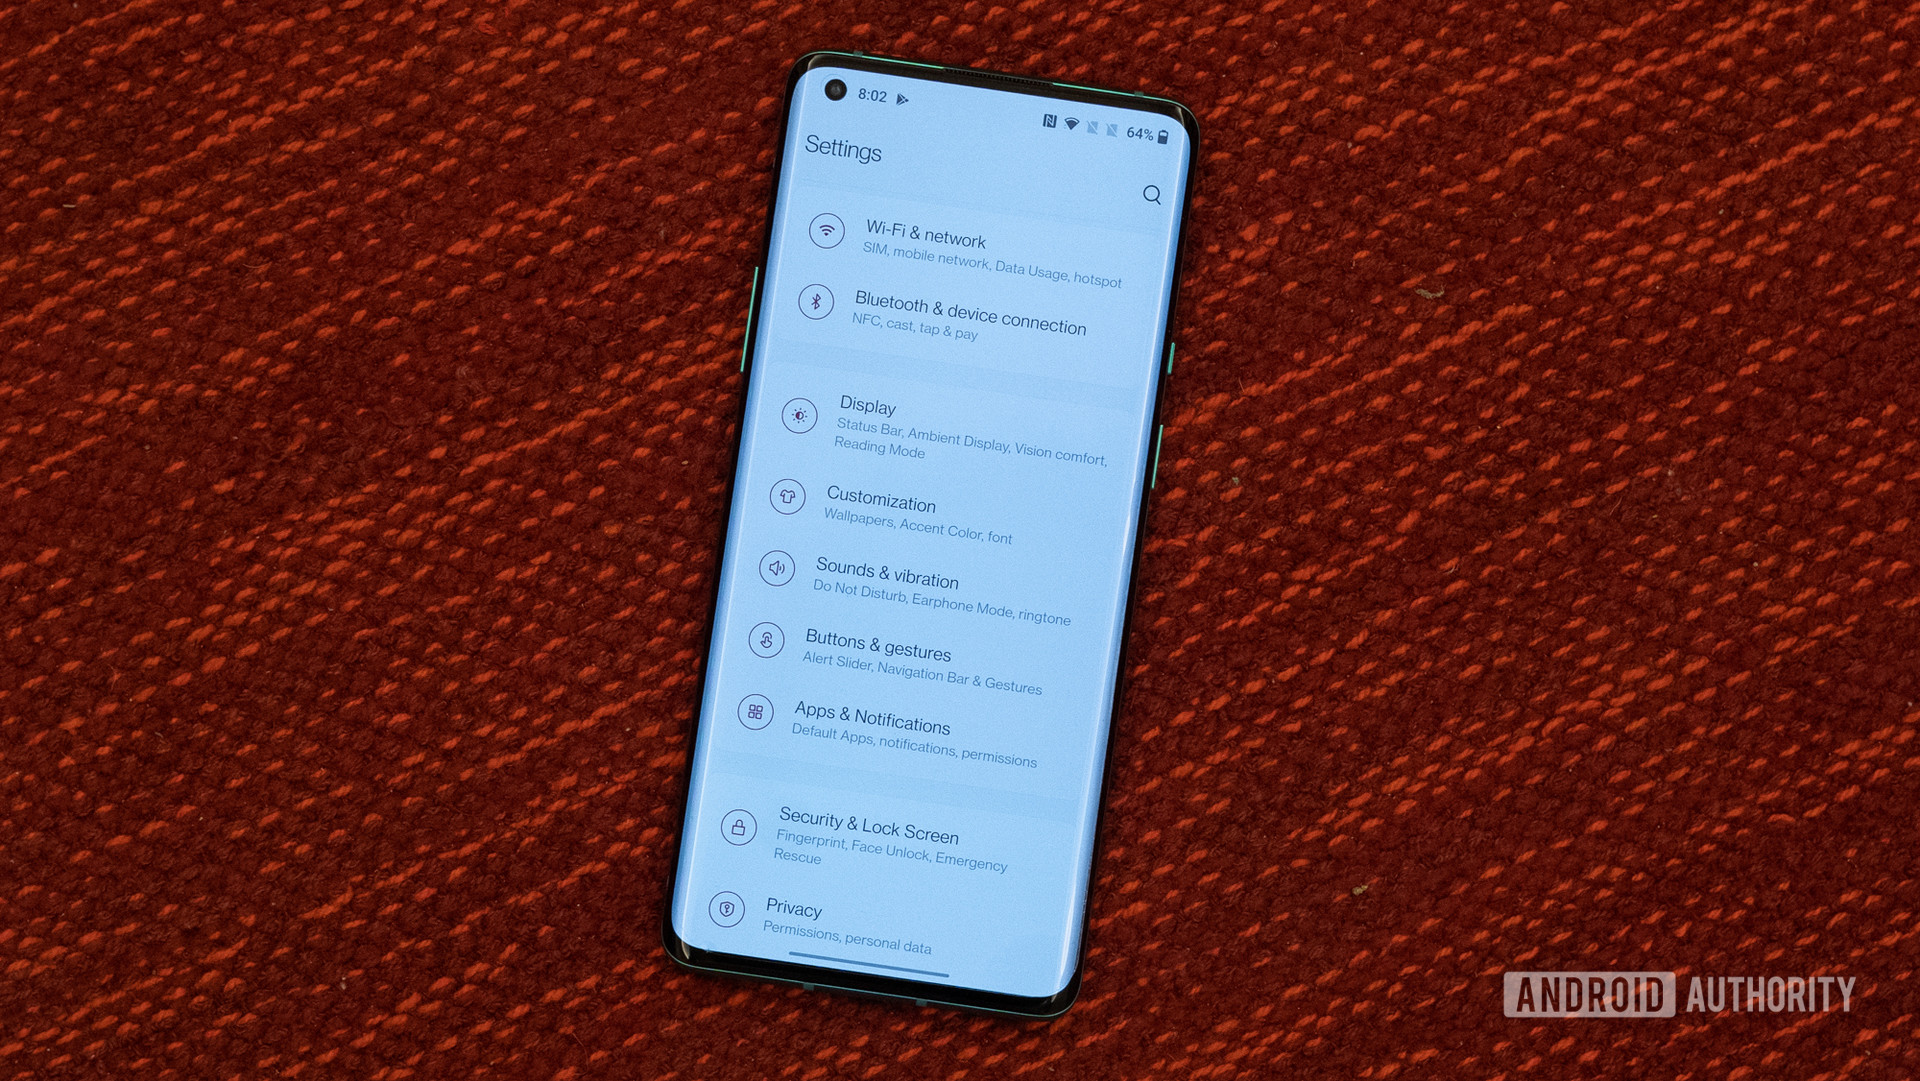 OnePlus 8 Pro Android 11 dev preview settings screen